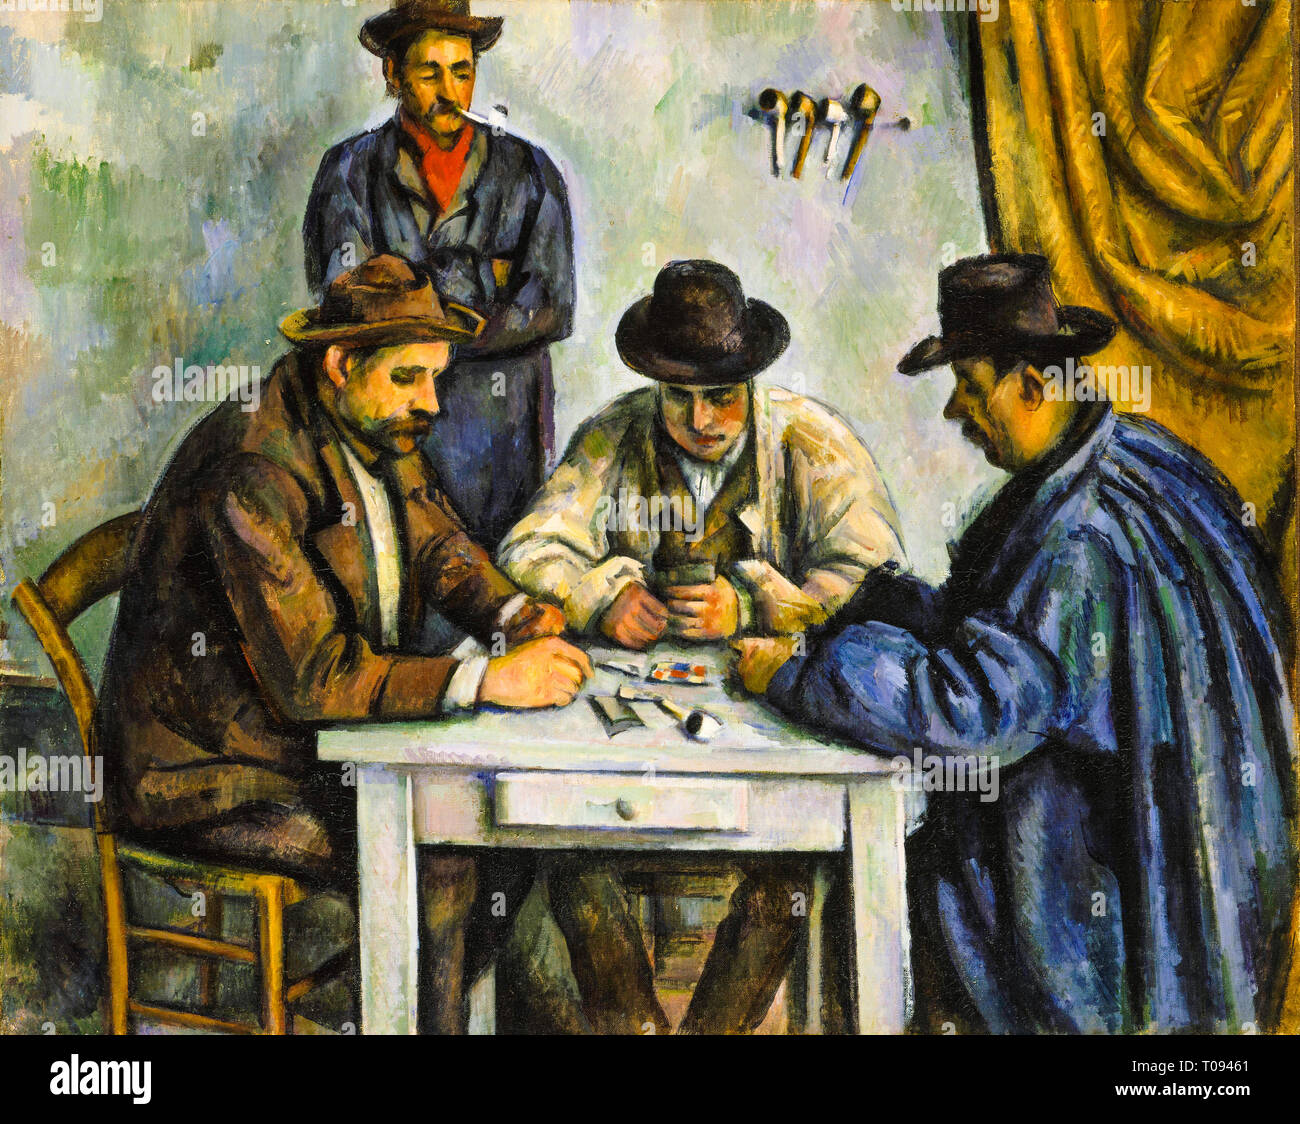 Paul Cézanne, The Card Players, Post-Impressionist painting, c. 1890-1892 Stock Photo